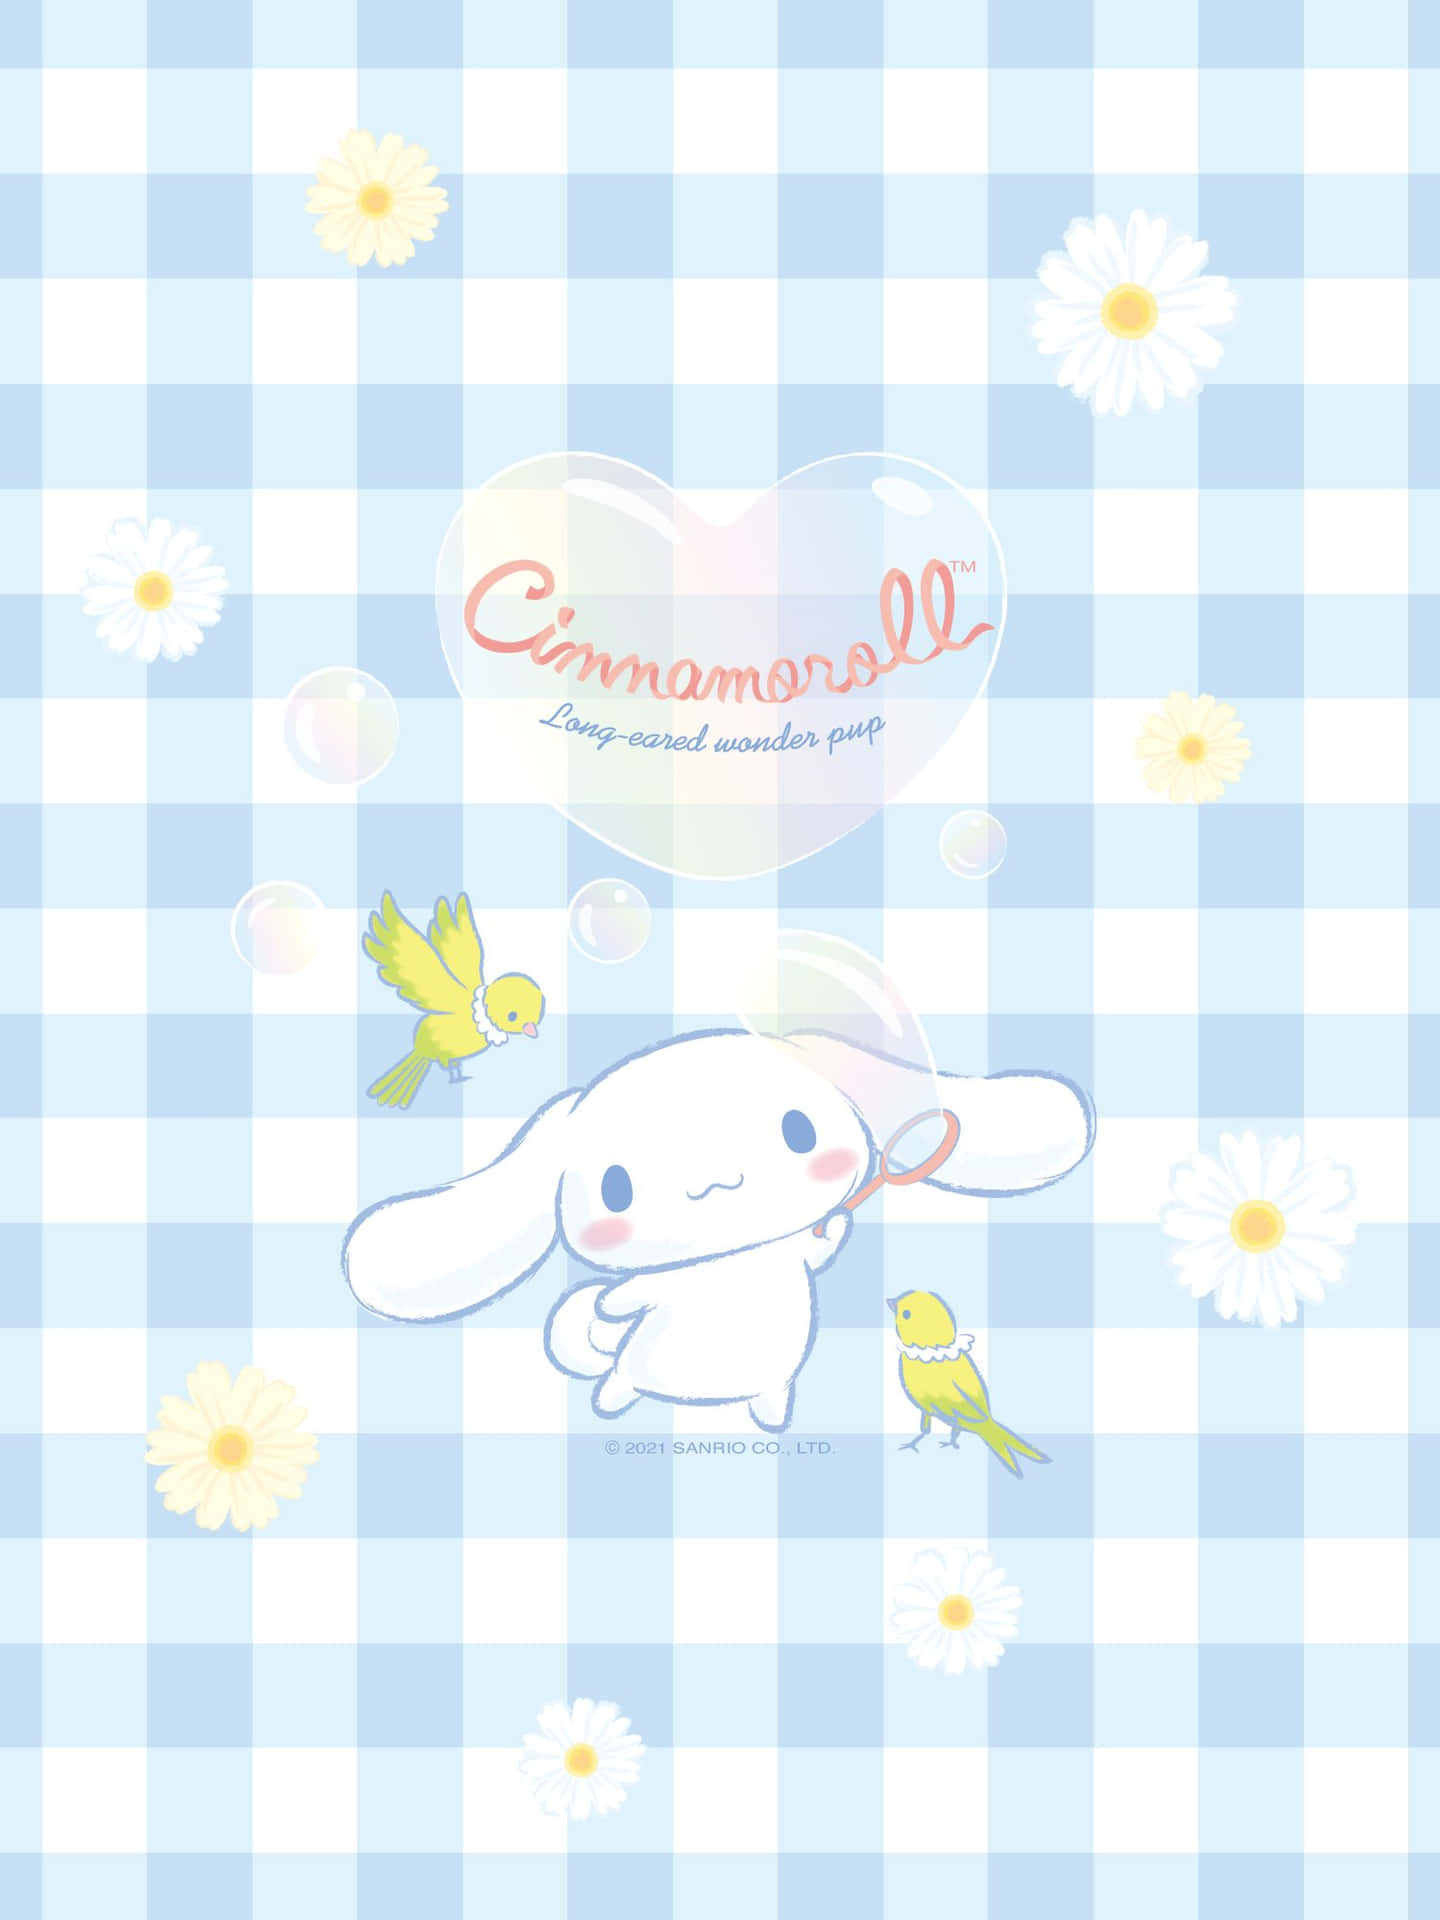 Take your favorite fluffy friends with you always with the Cinnamoroll Phone! Wallpaper